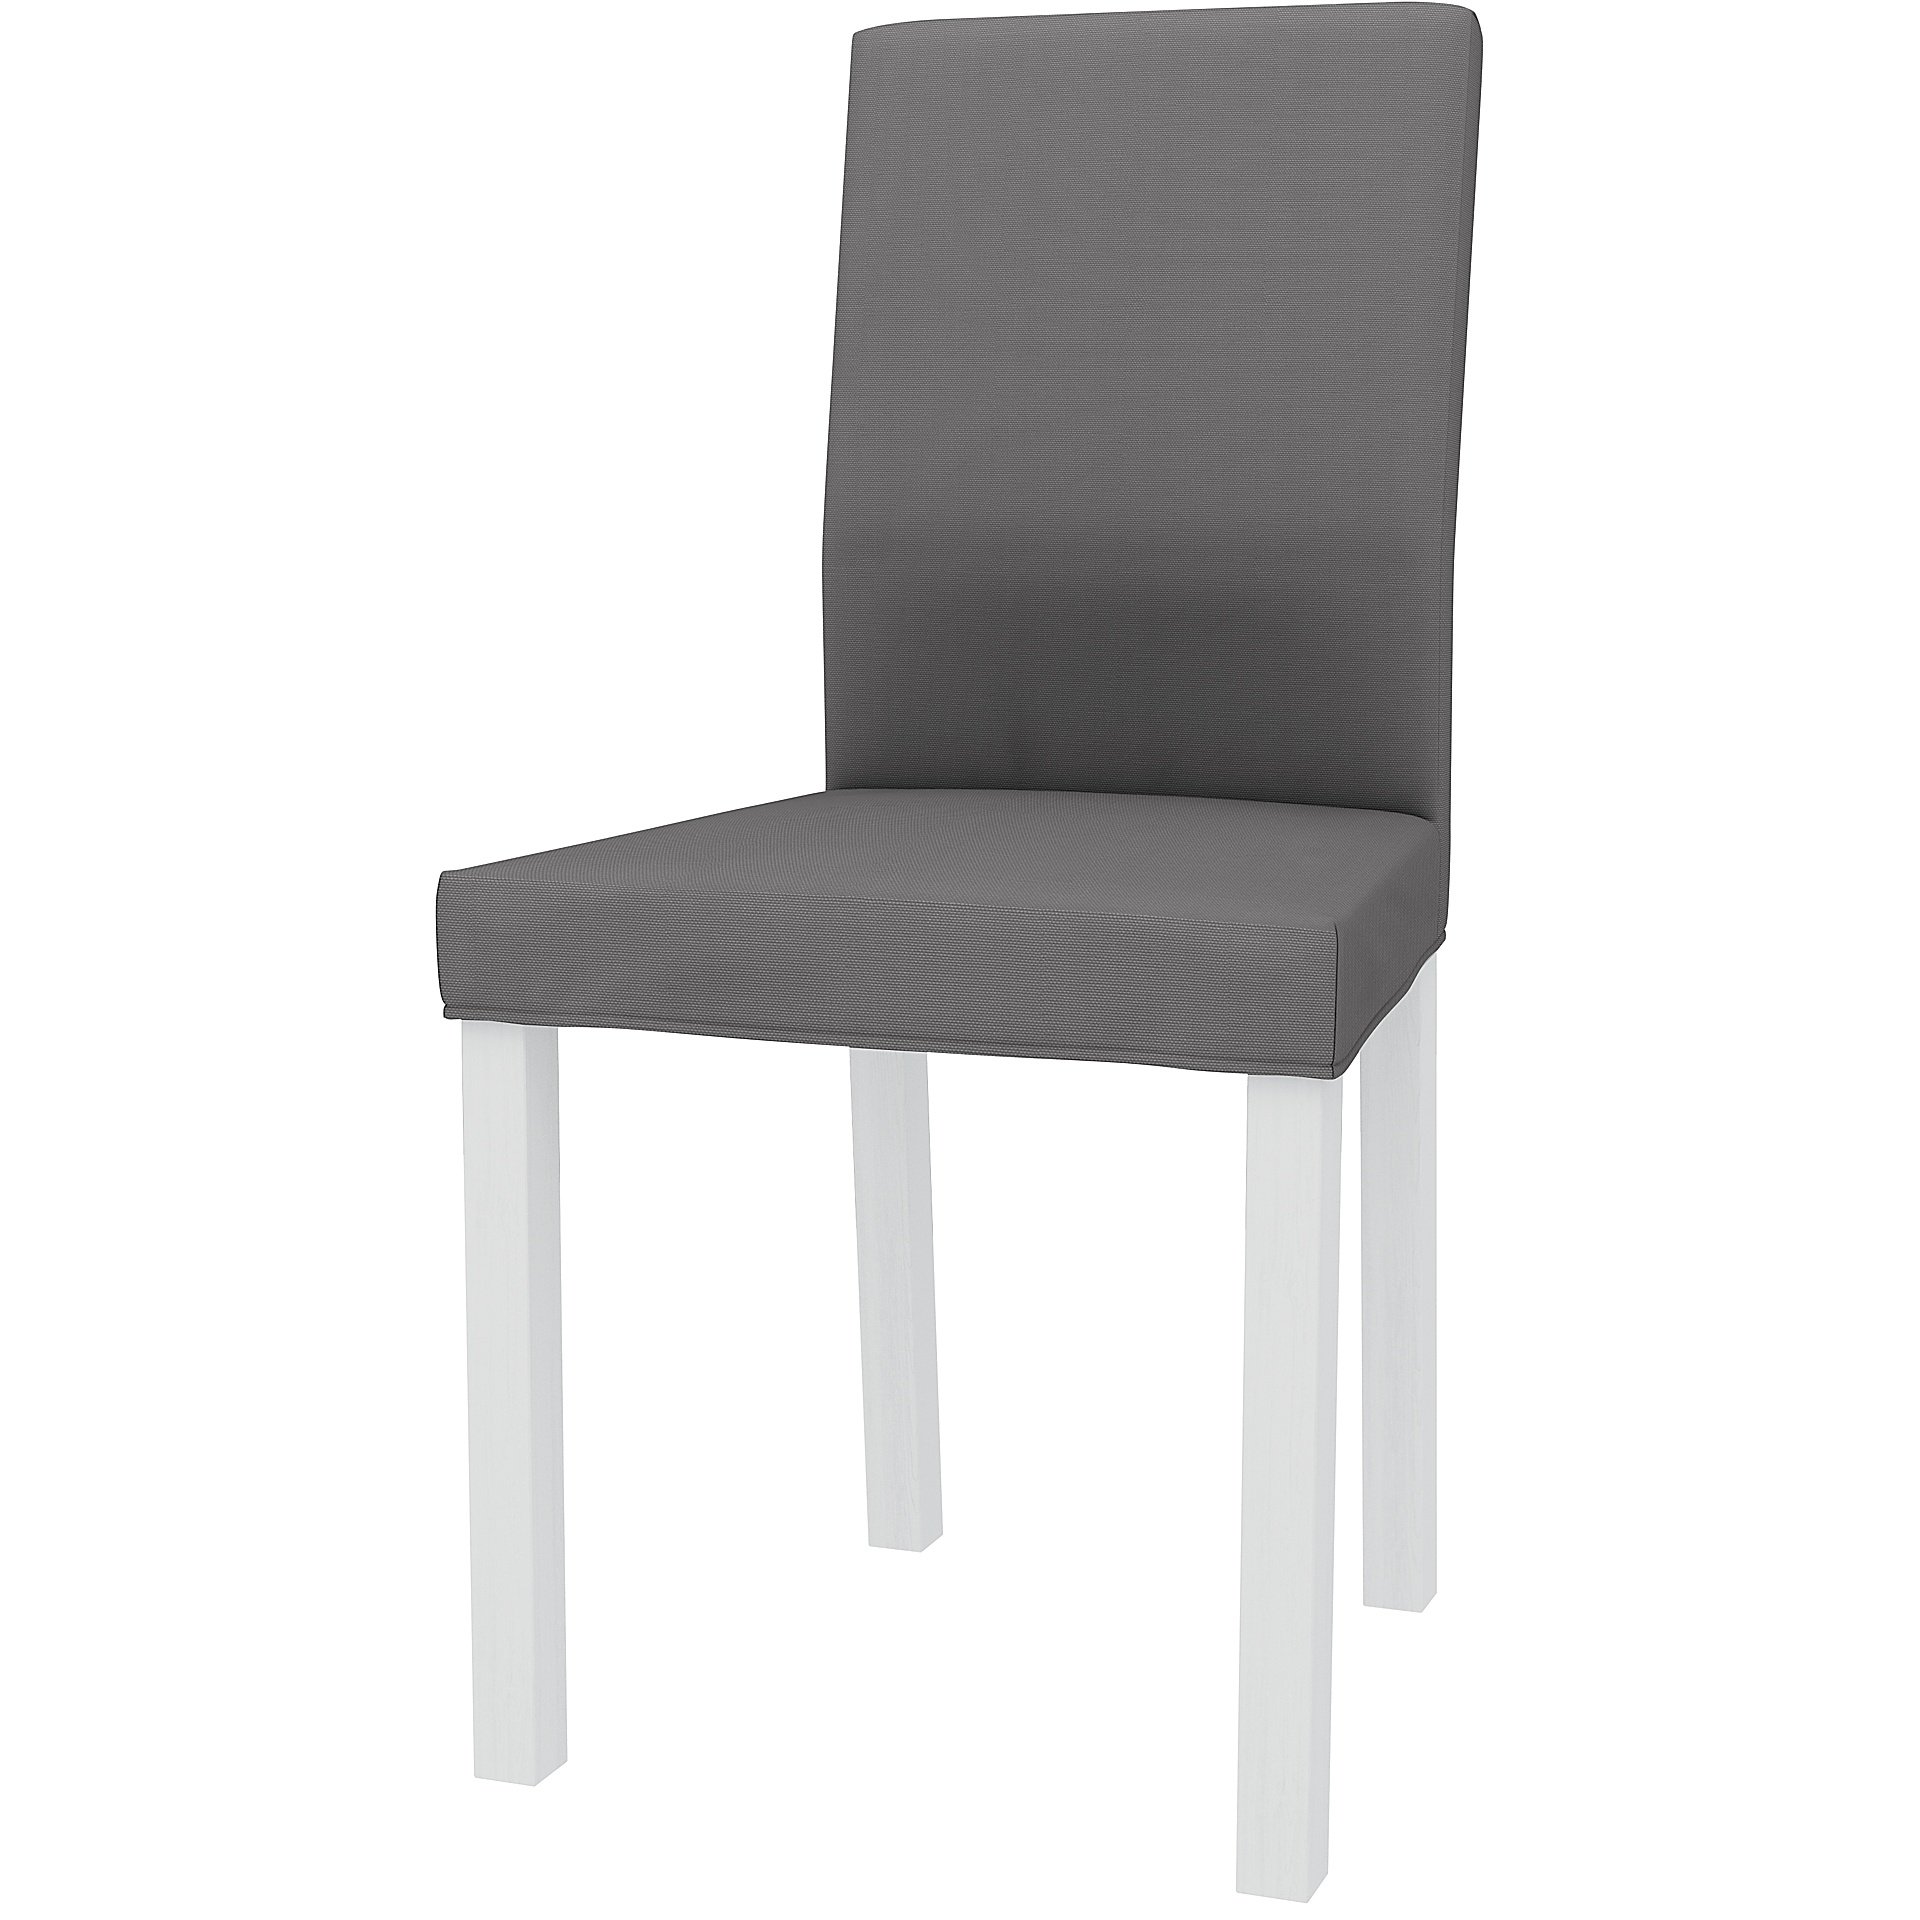 IKEA - KATTIL DINING CHAIR COVER, Smoked Pearl, Cotton - Bemz